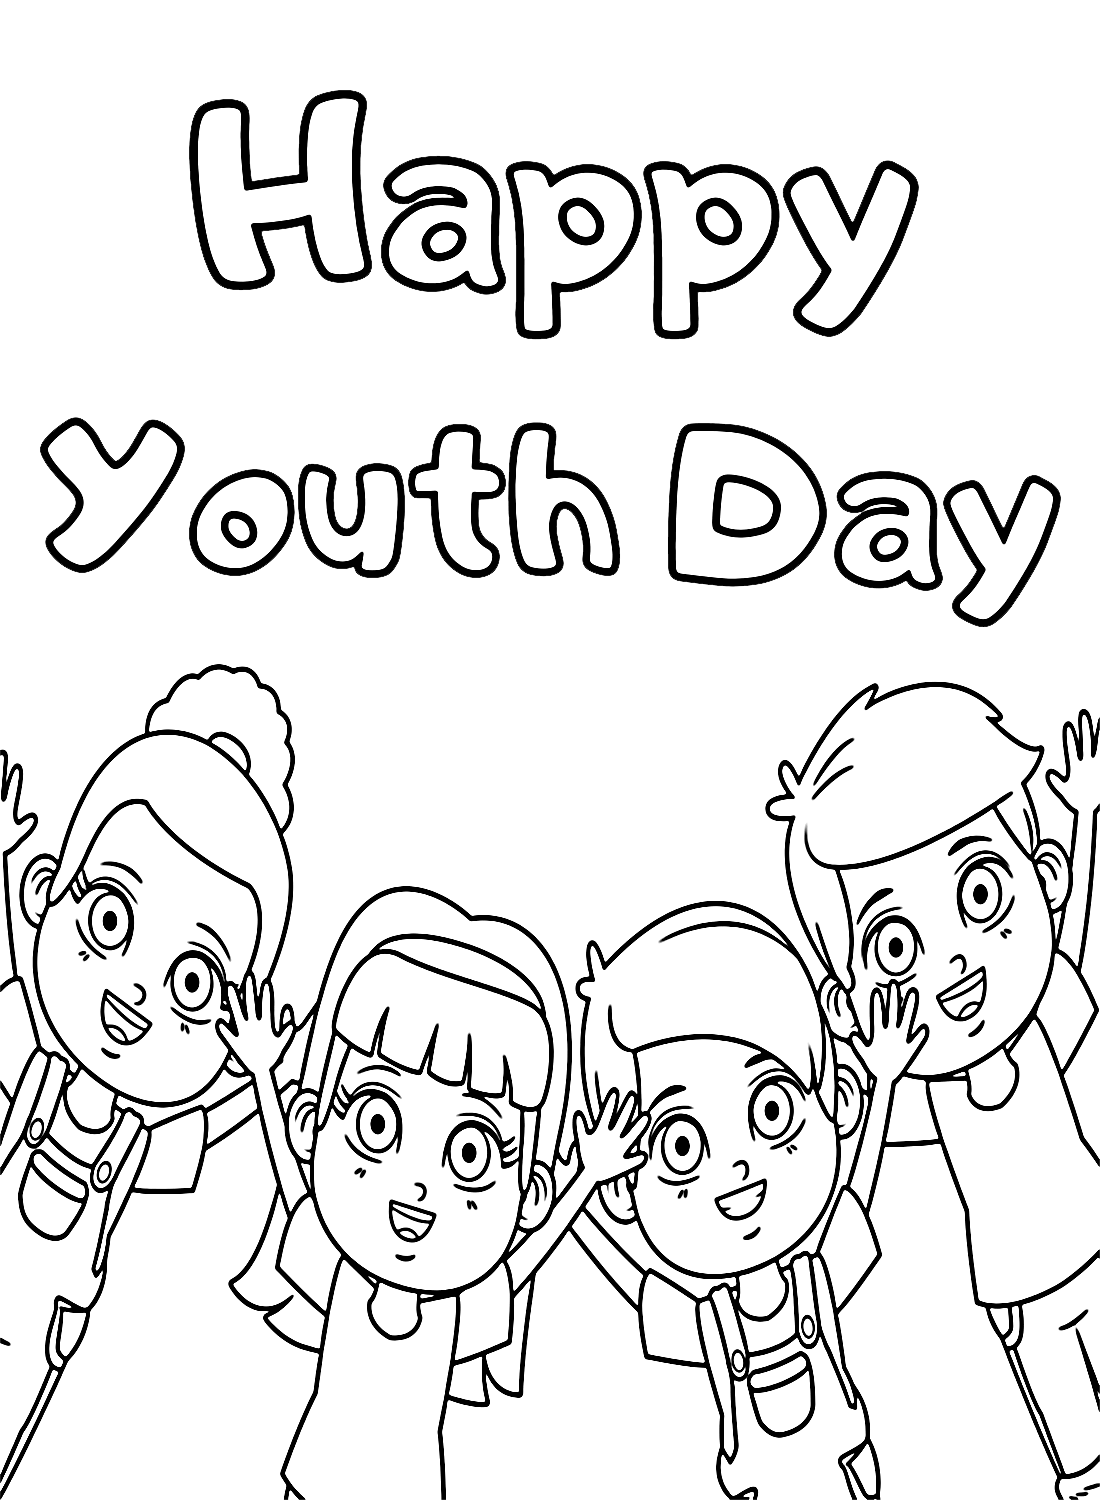 Happy Youth Day Printable Coloring Pages from International Youth Day